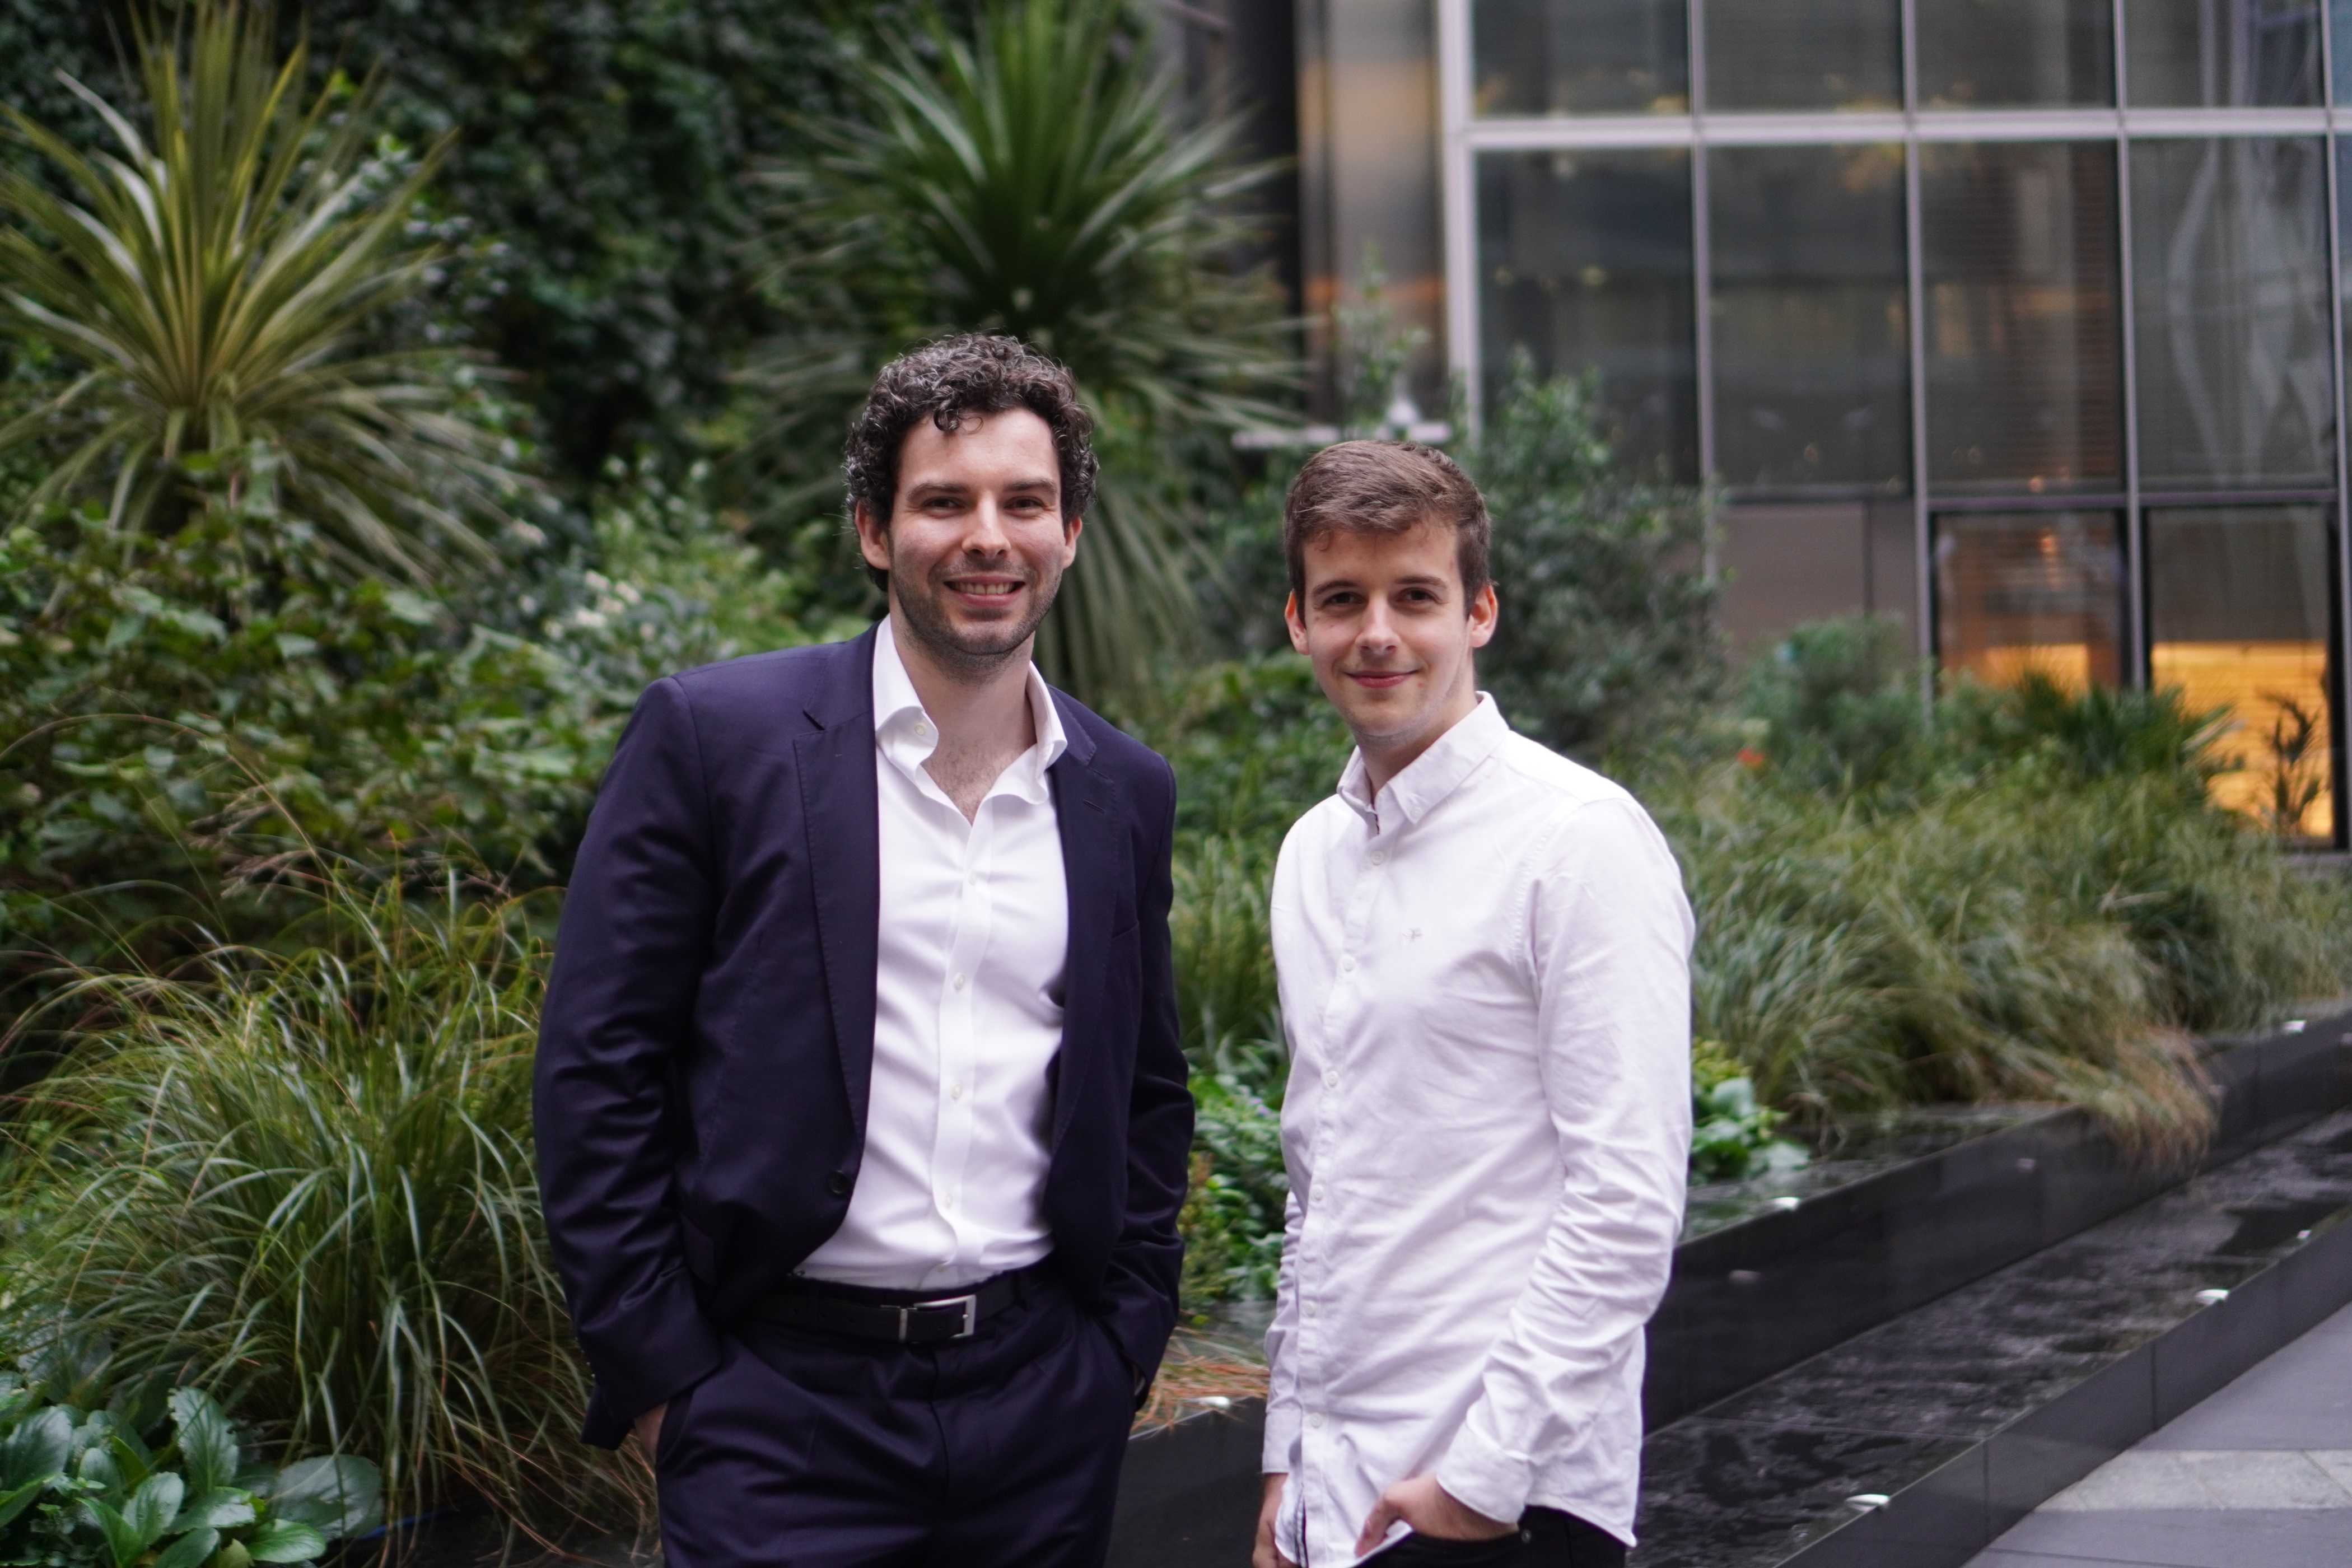 Risk Ledger founders: (L to R) Haydn Brooks and Daniel Saul